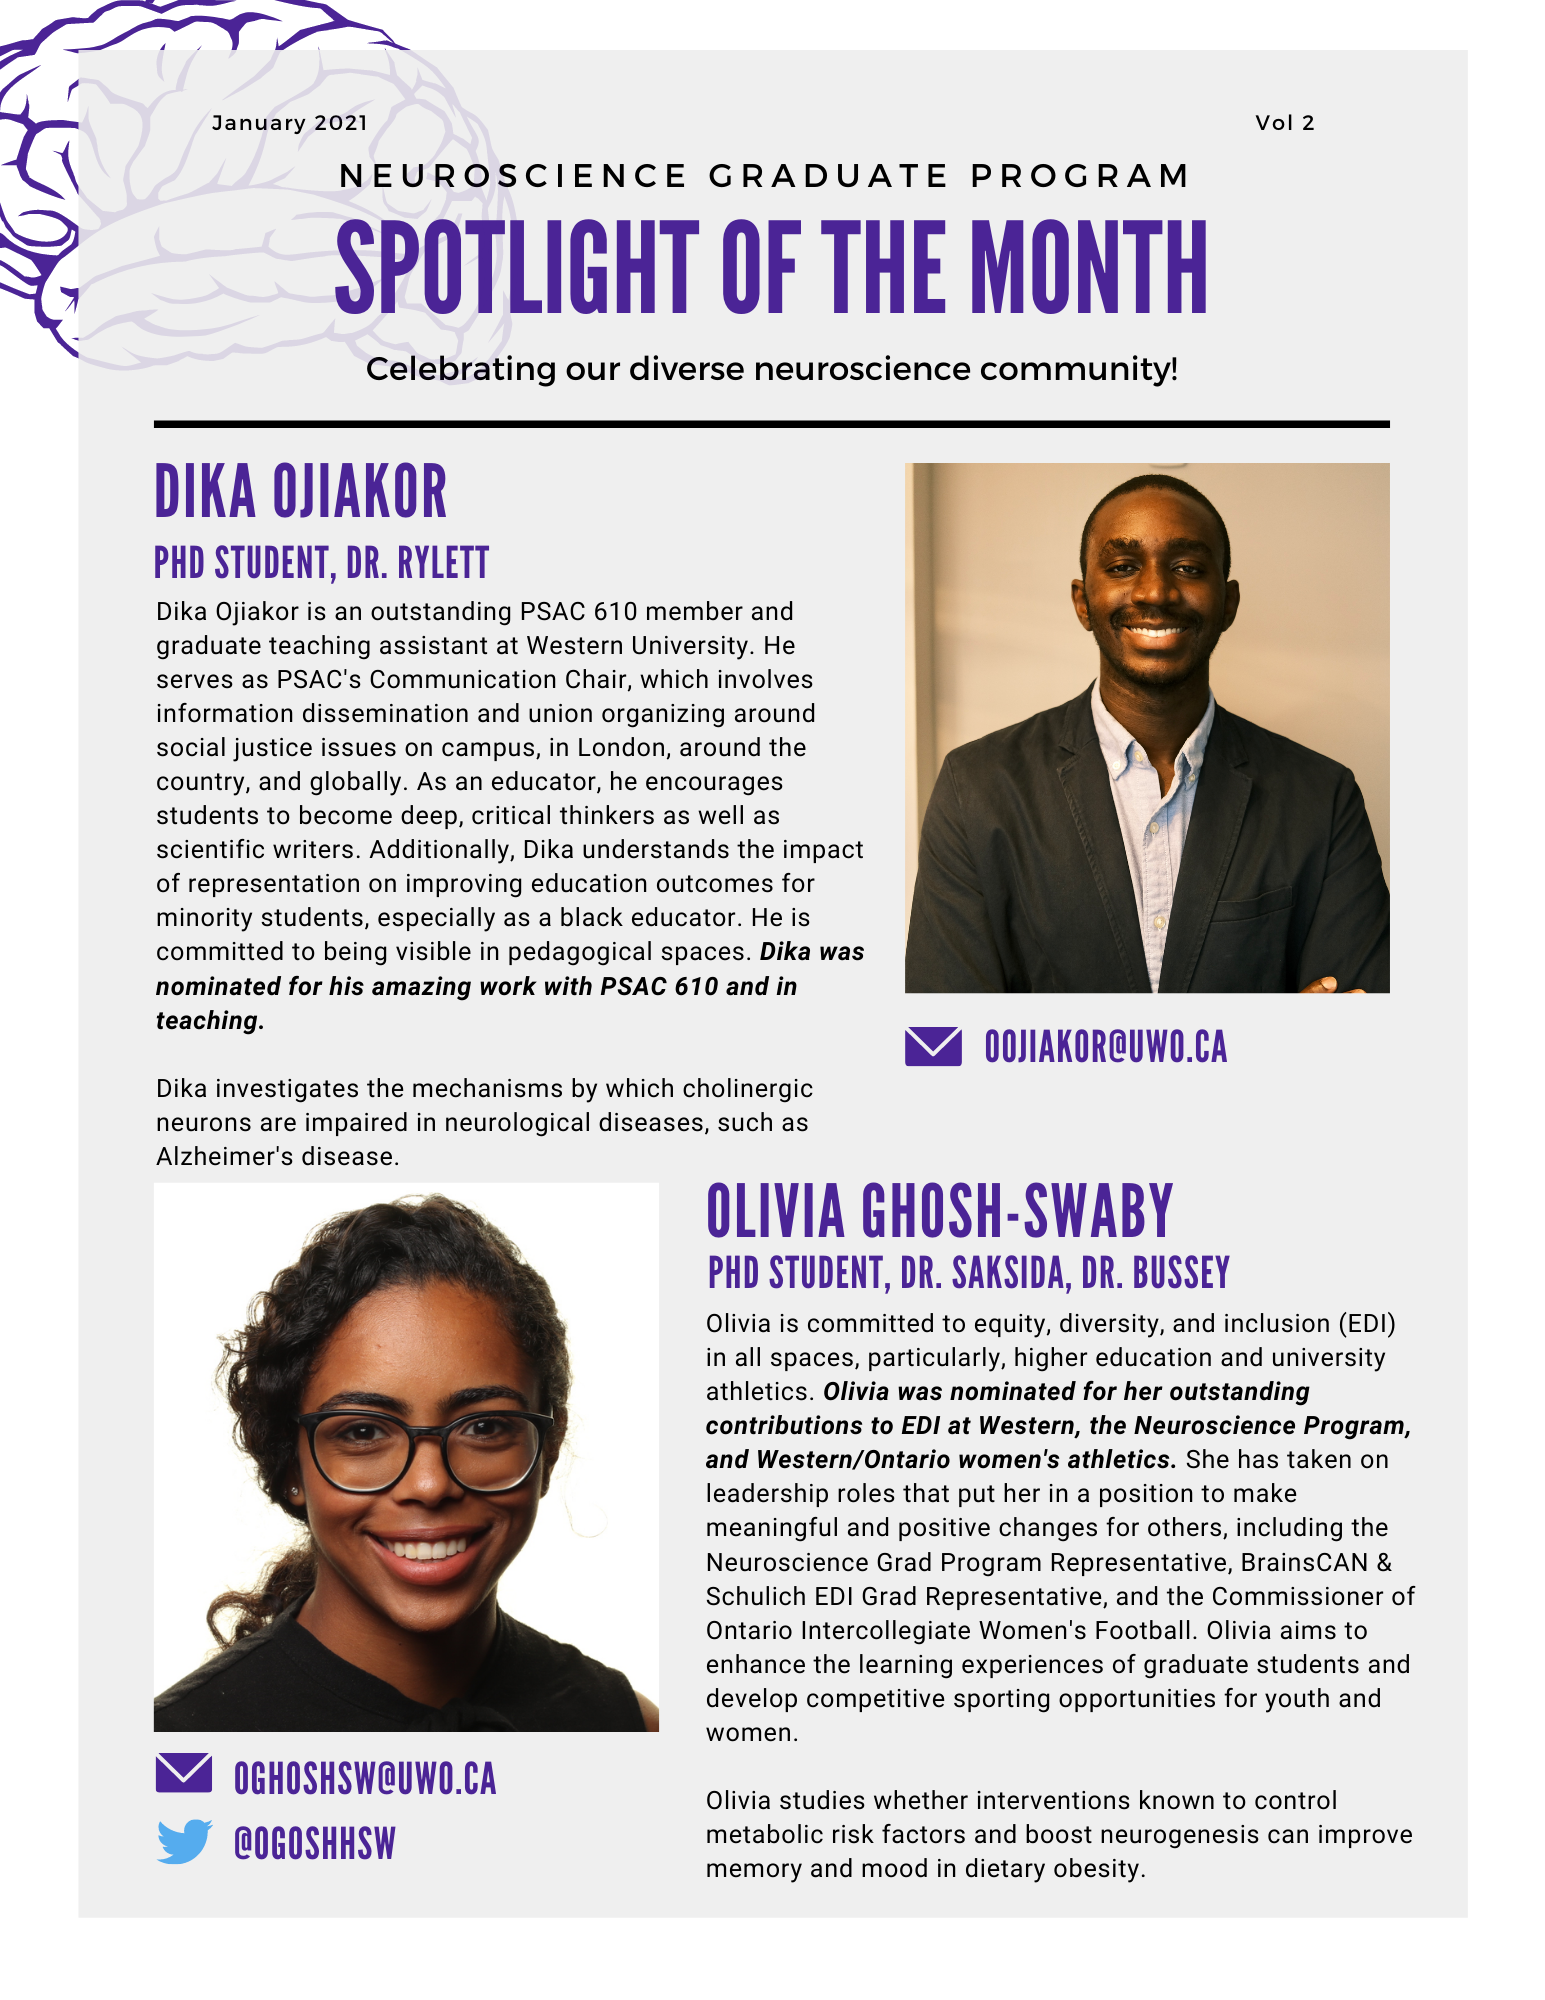 Spotlight of the month